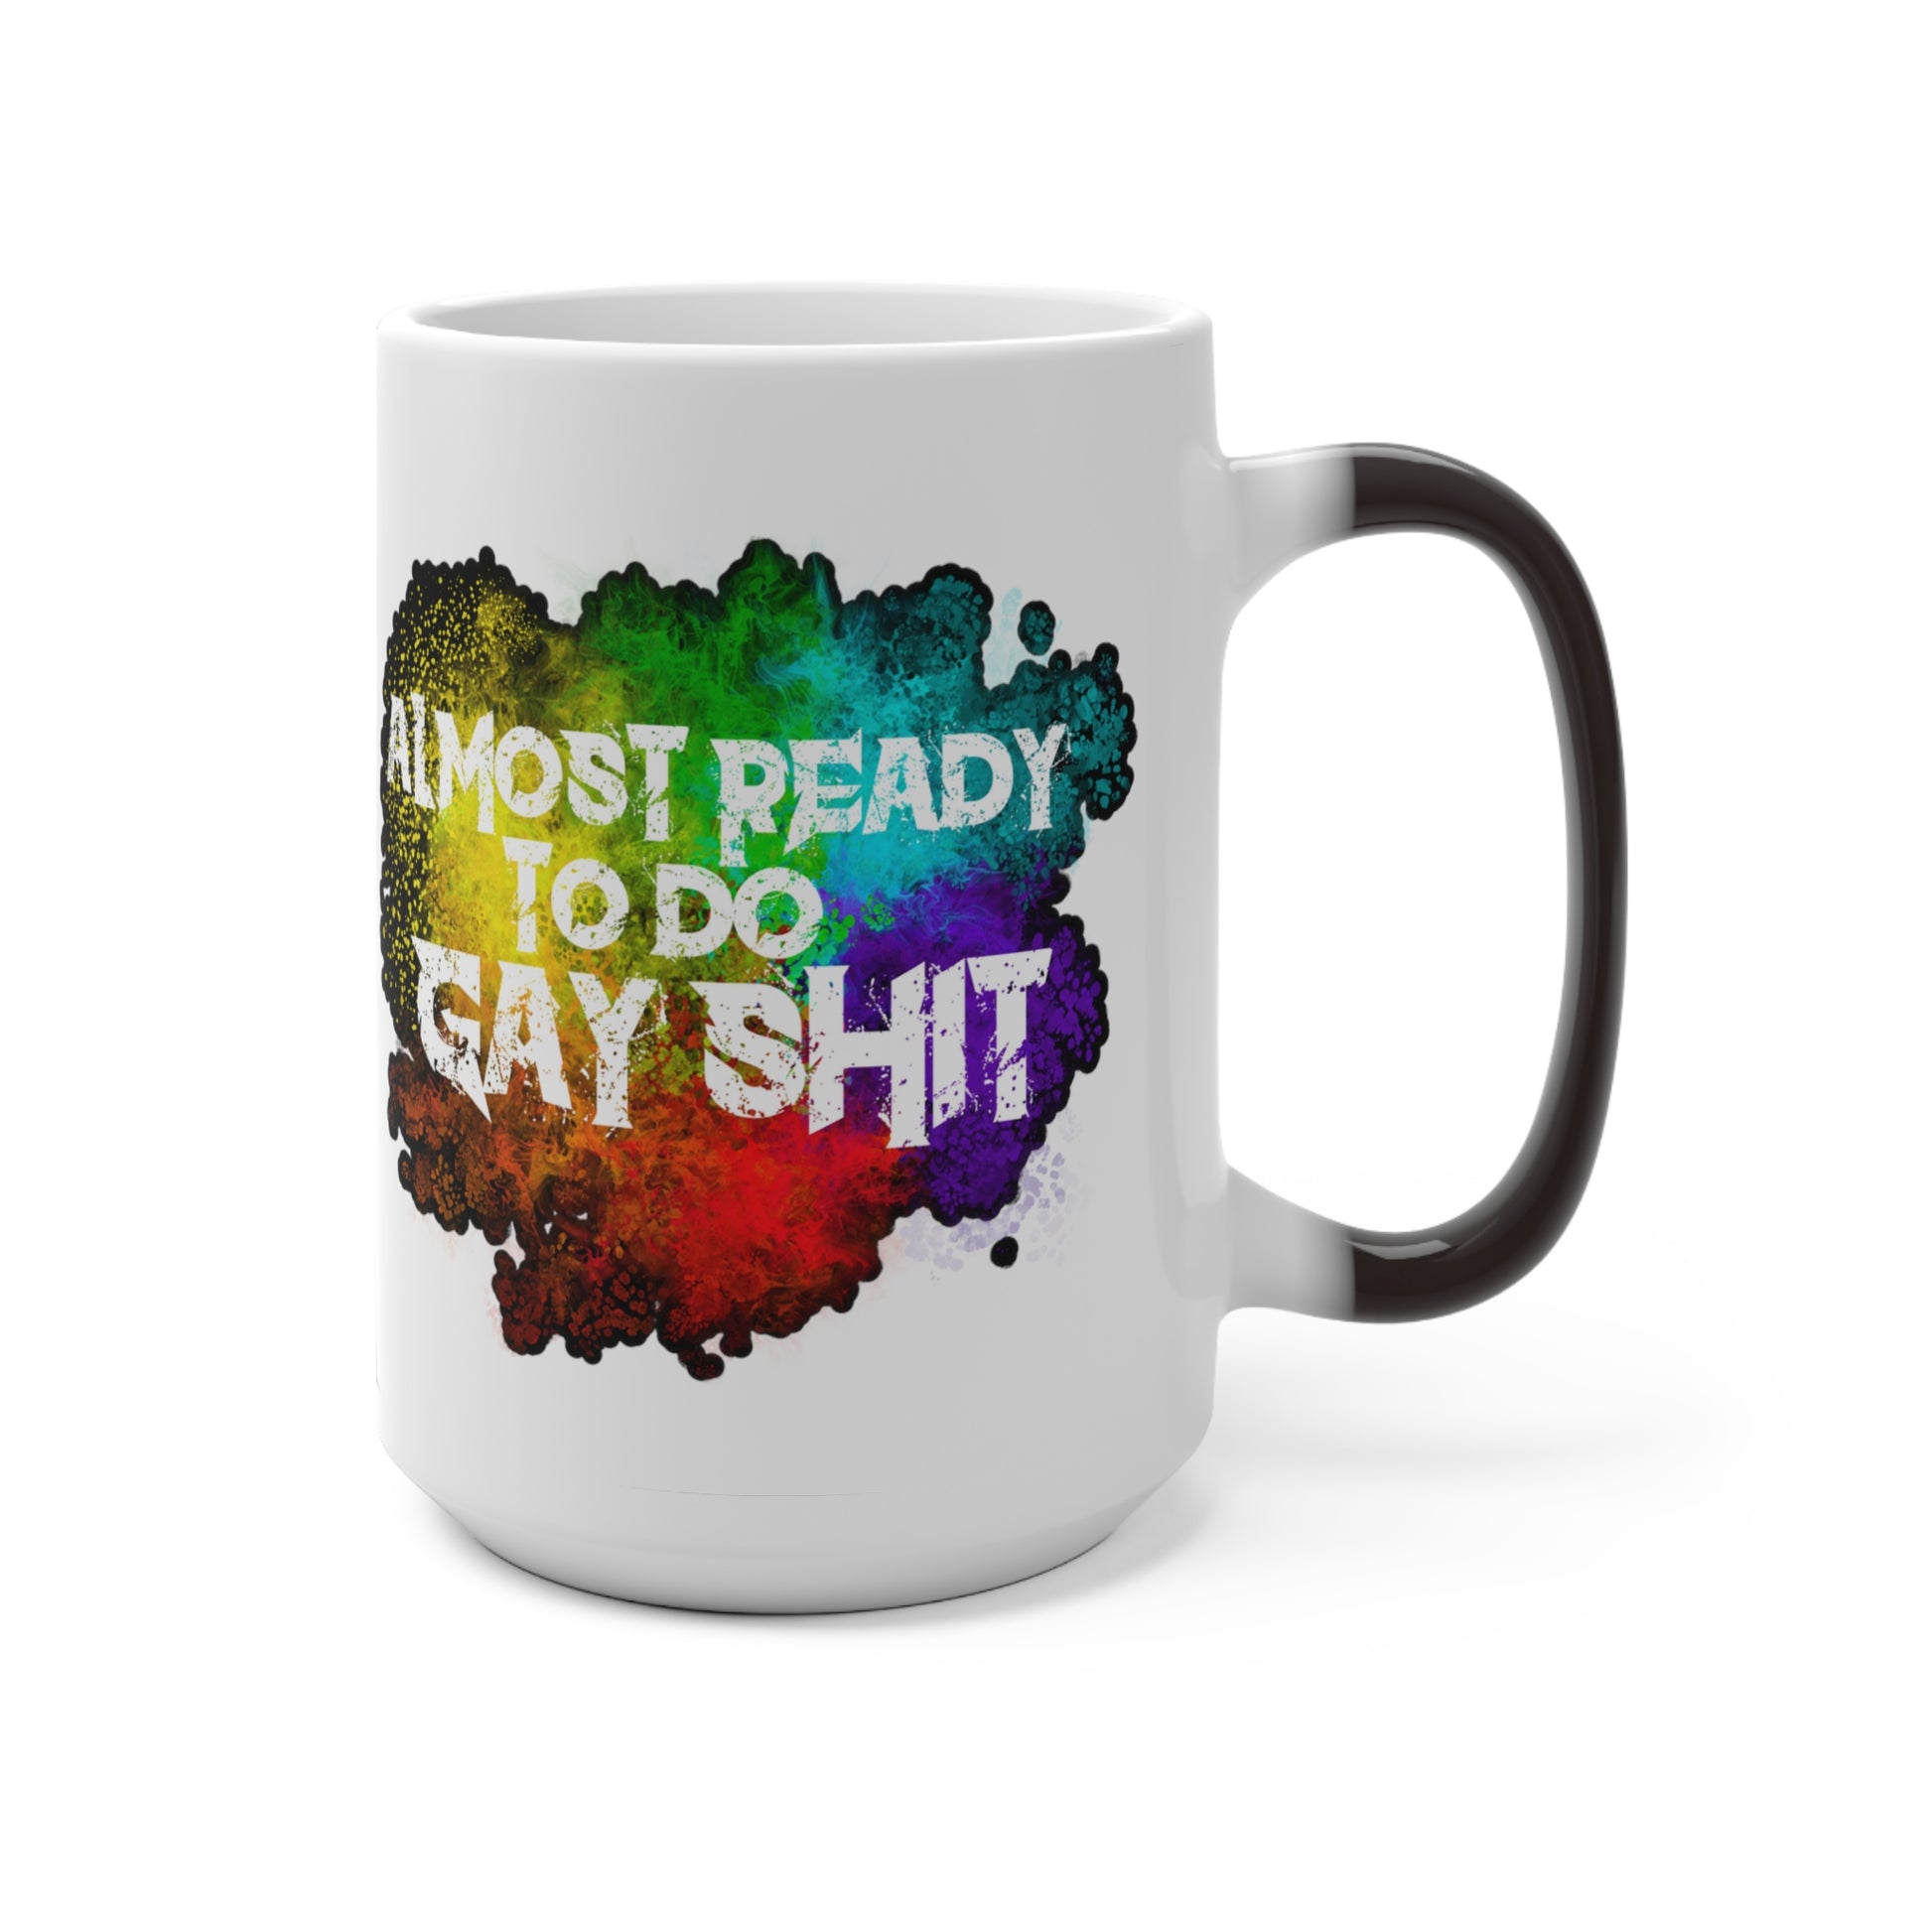 Discover the 'Almost Ready To Do Gay Shit' 11oz color-changing mug from Moody Booty Apparel. This eye-catching LGBTQ pride coffee mug shifts colors with heat activation. Embrace diversity and celebrate with style.